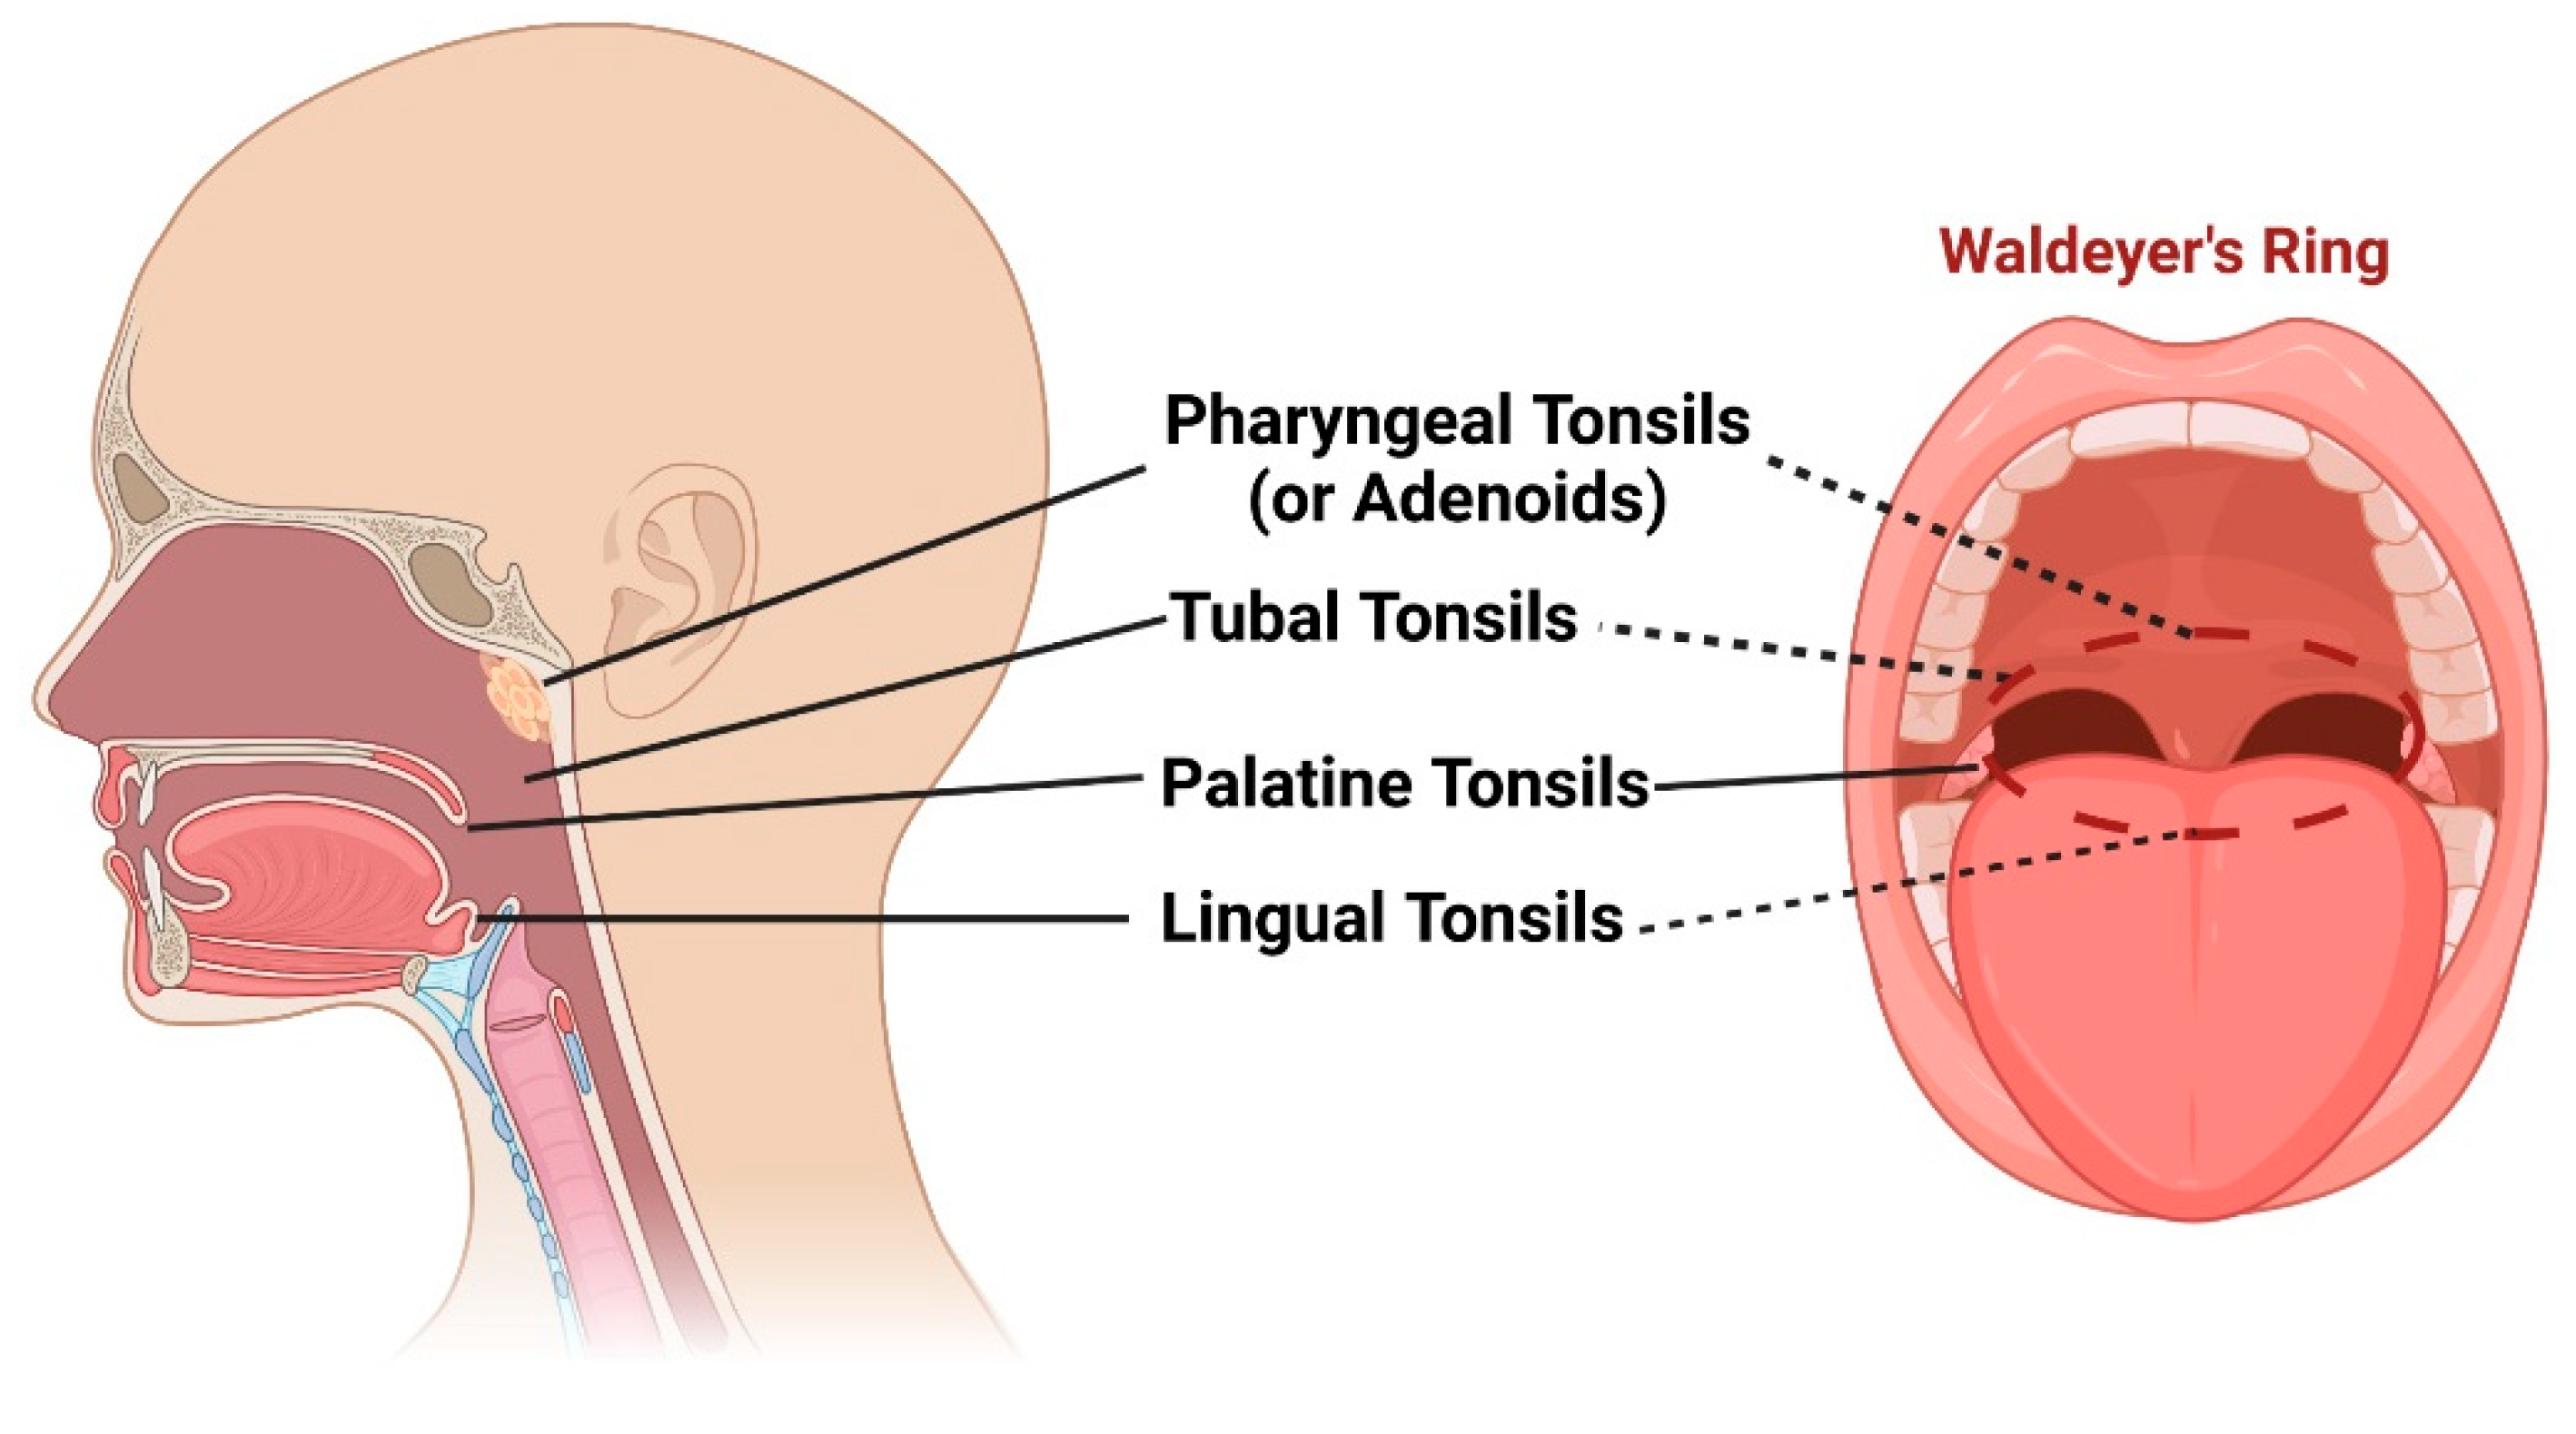 Tonsils of the pharynx: types, location and anatomy | GetBodySmart